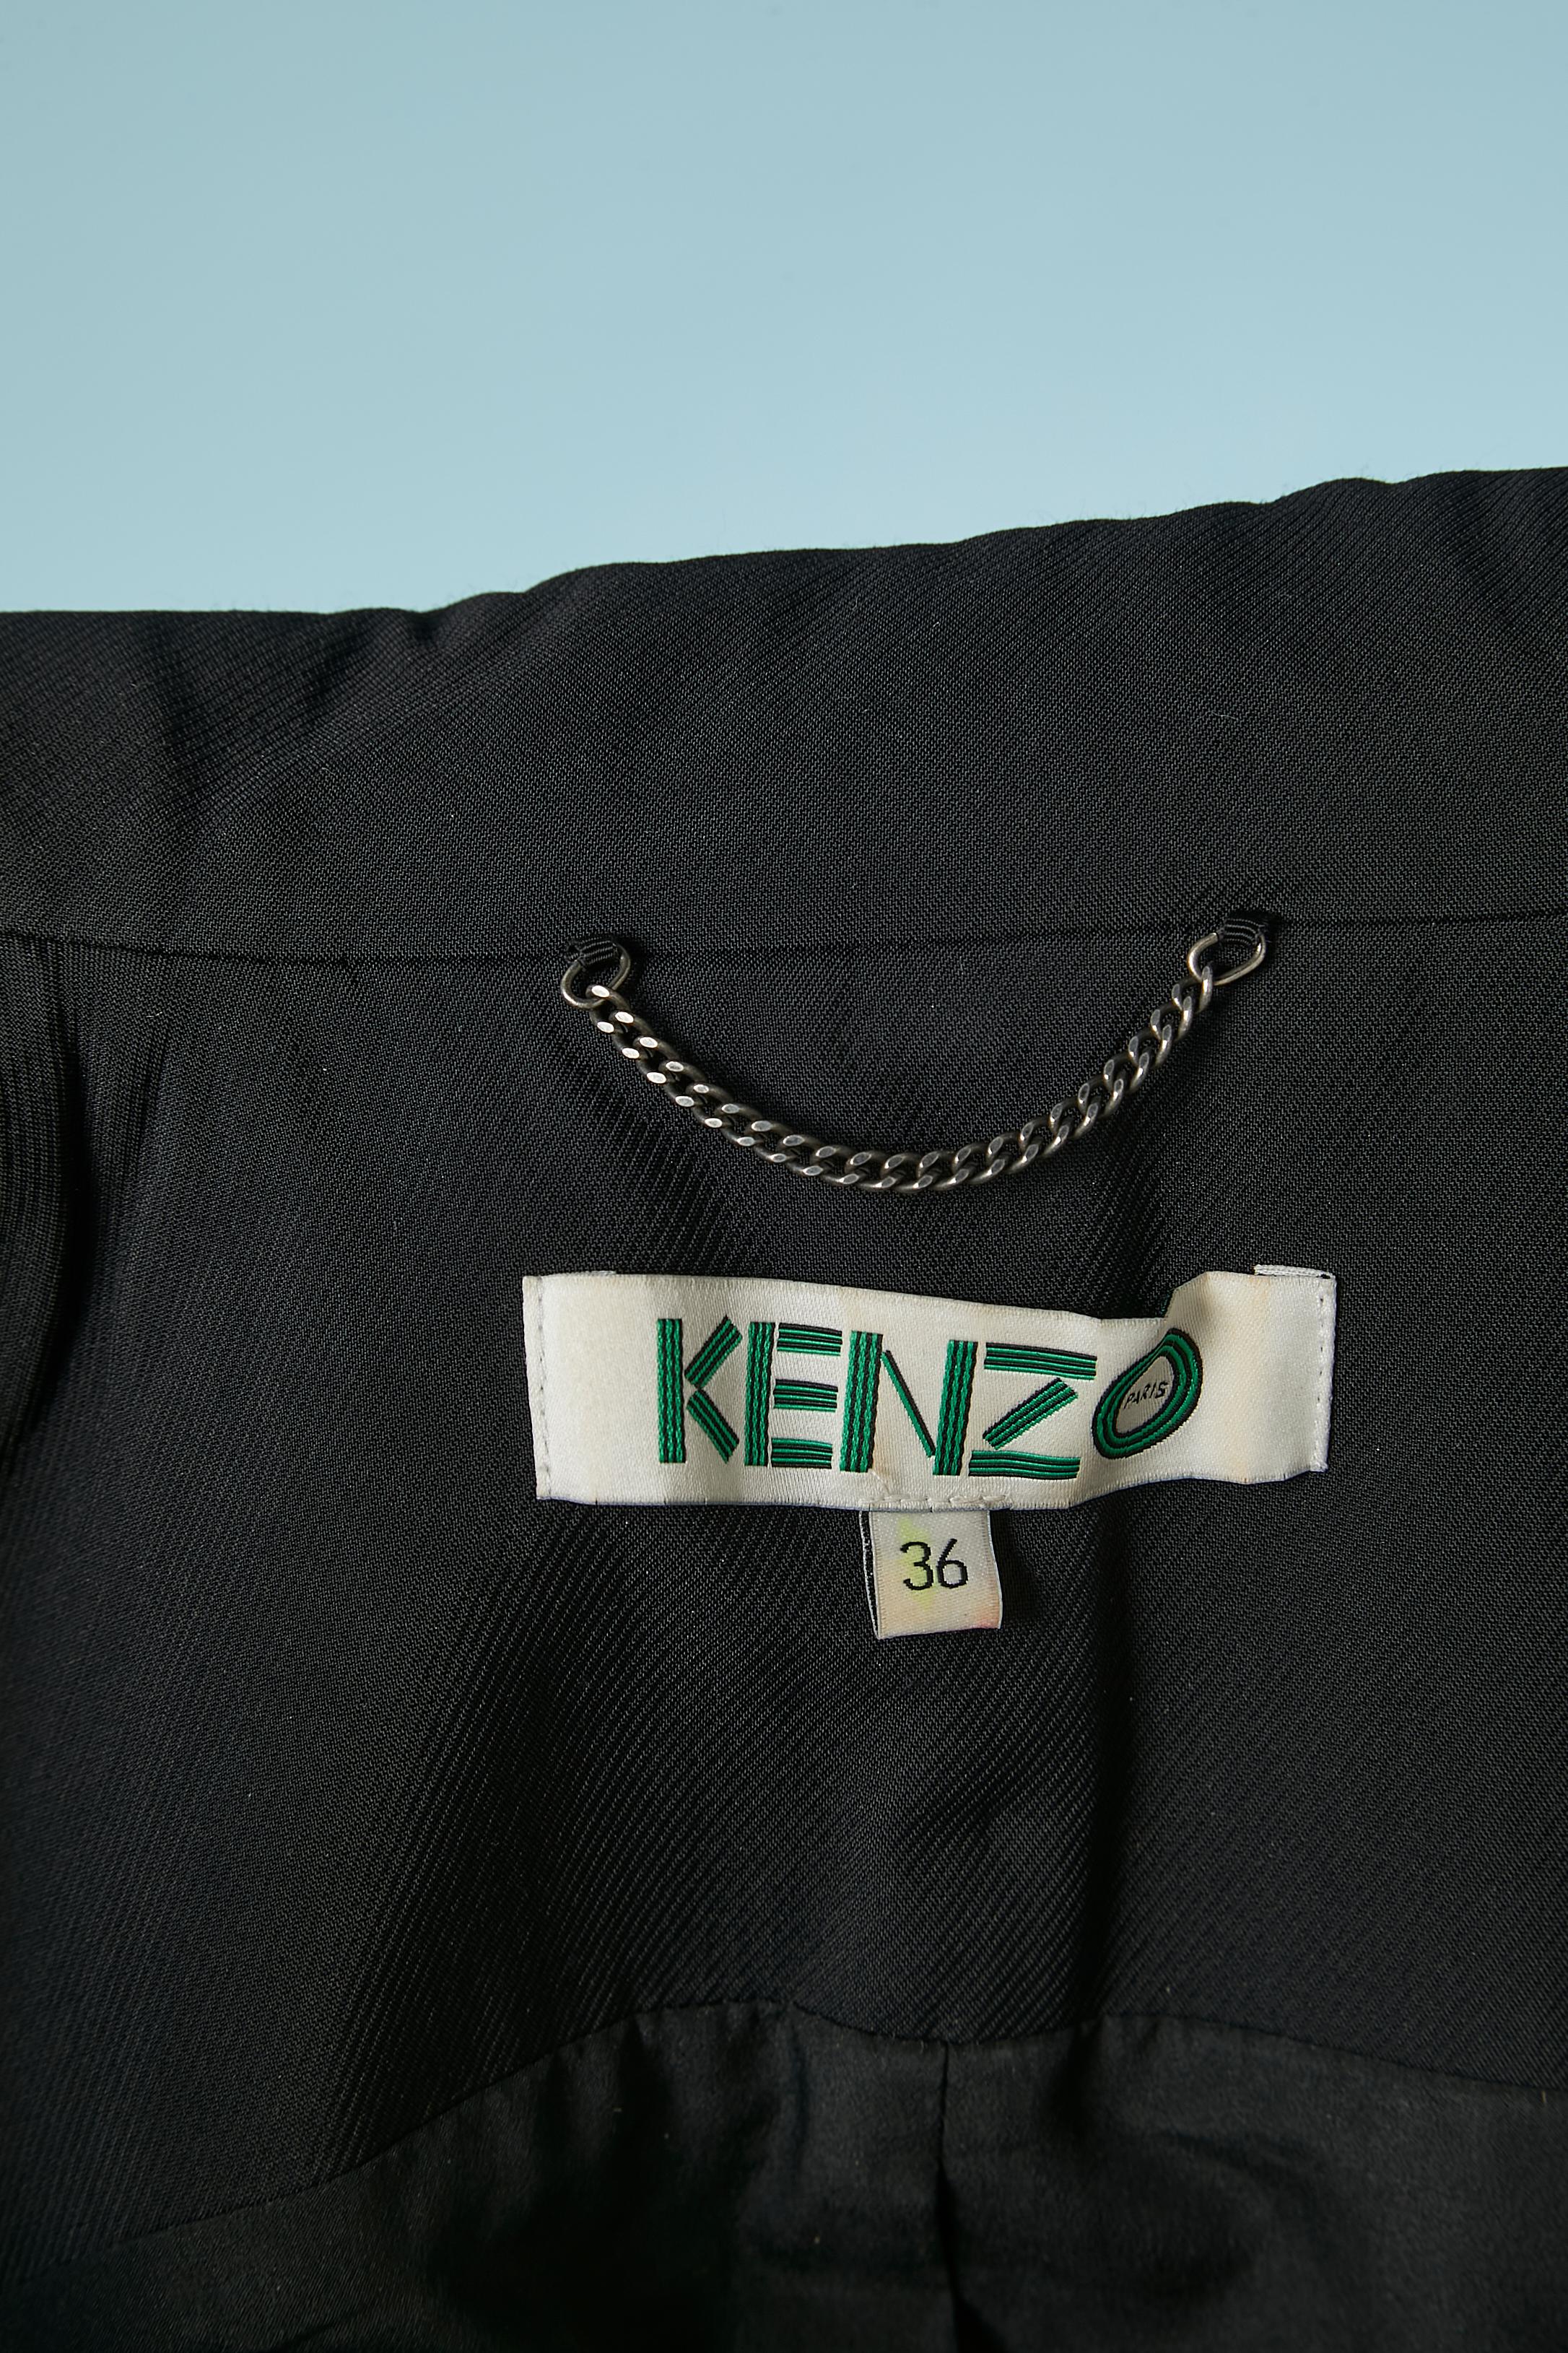 Black technical tailored sleeveless jacket Kenzo Paris SS 2018 For Sale 3